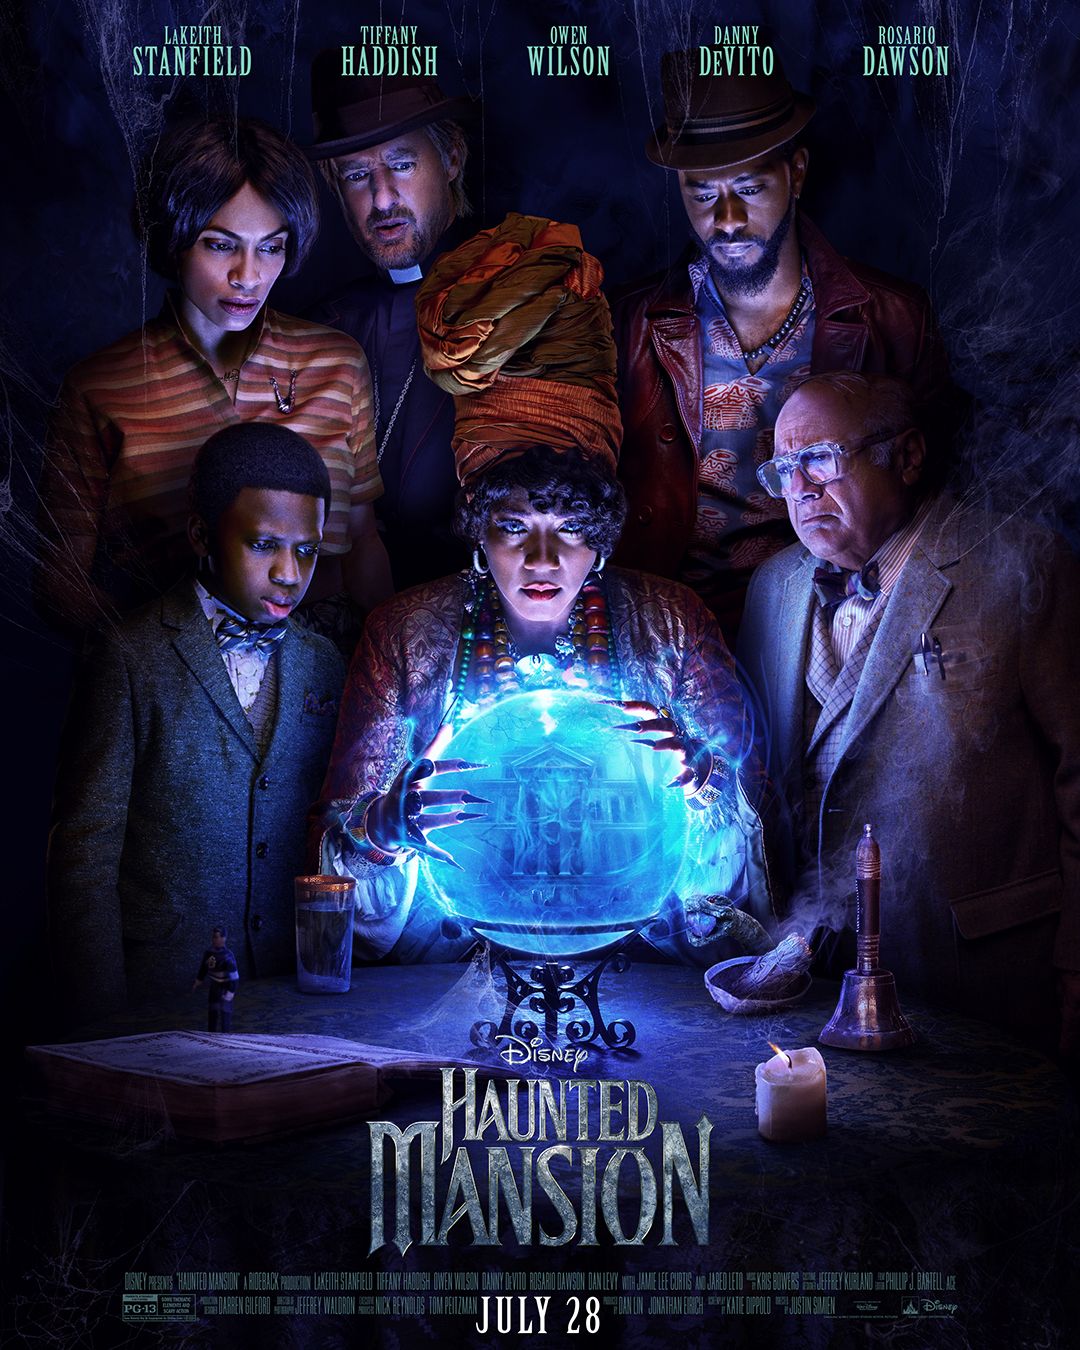 The theatrical poster for Haunted Mansion showing the main cast of characters.